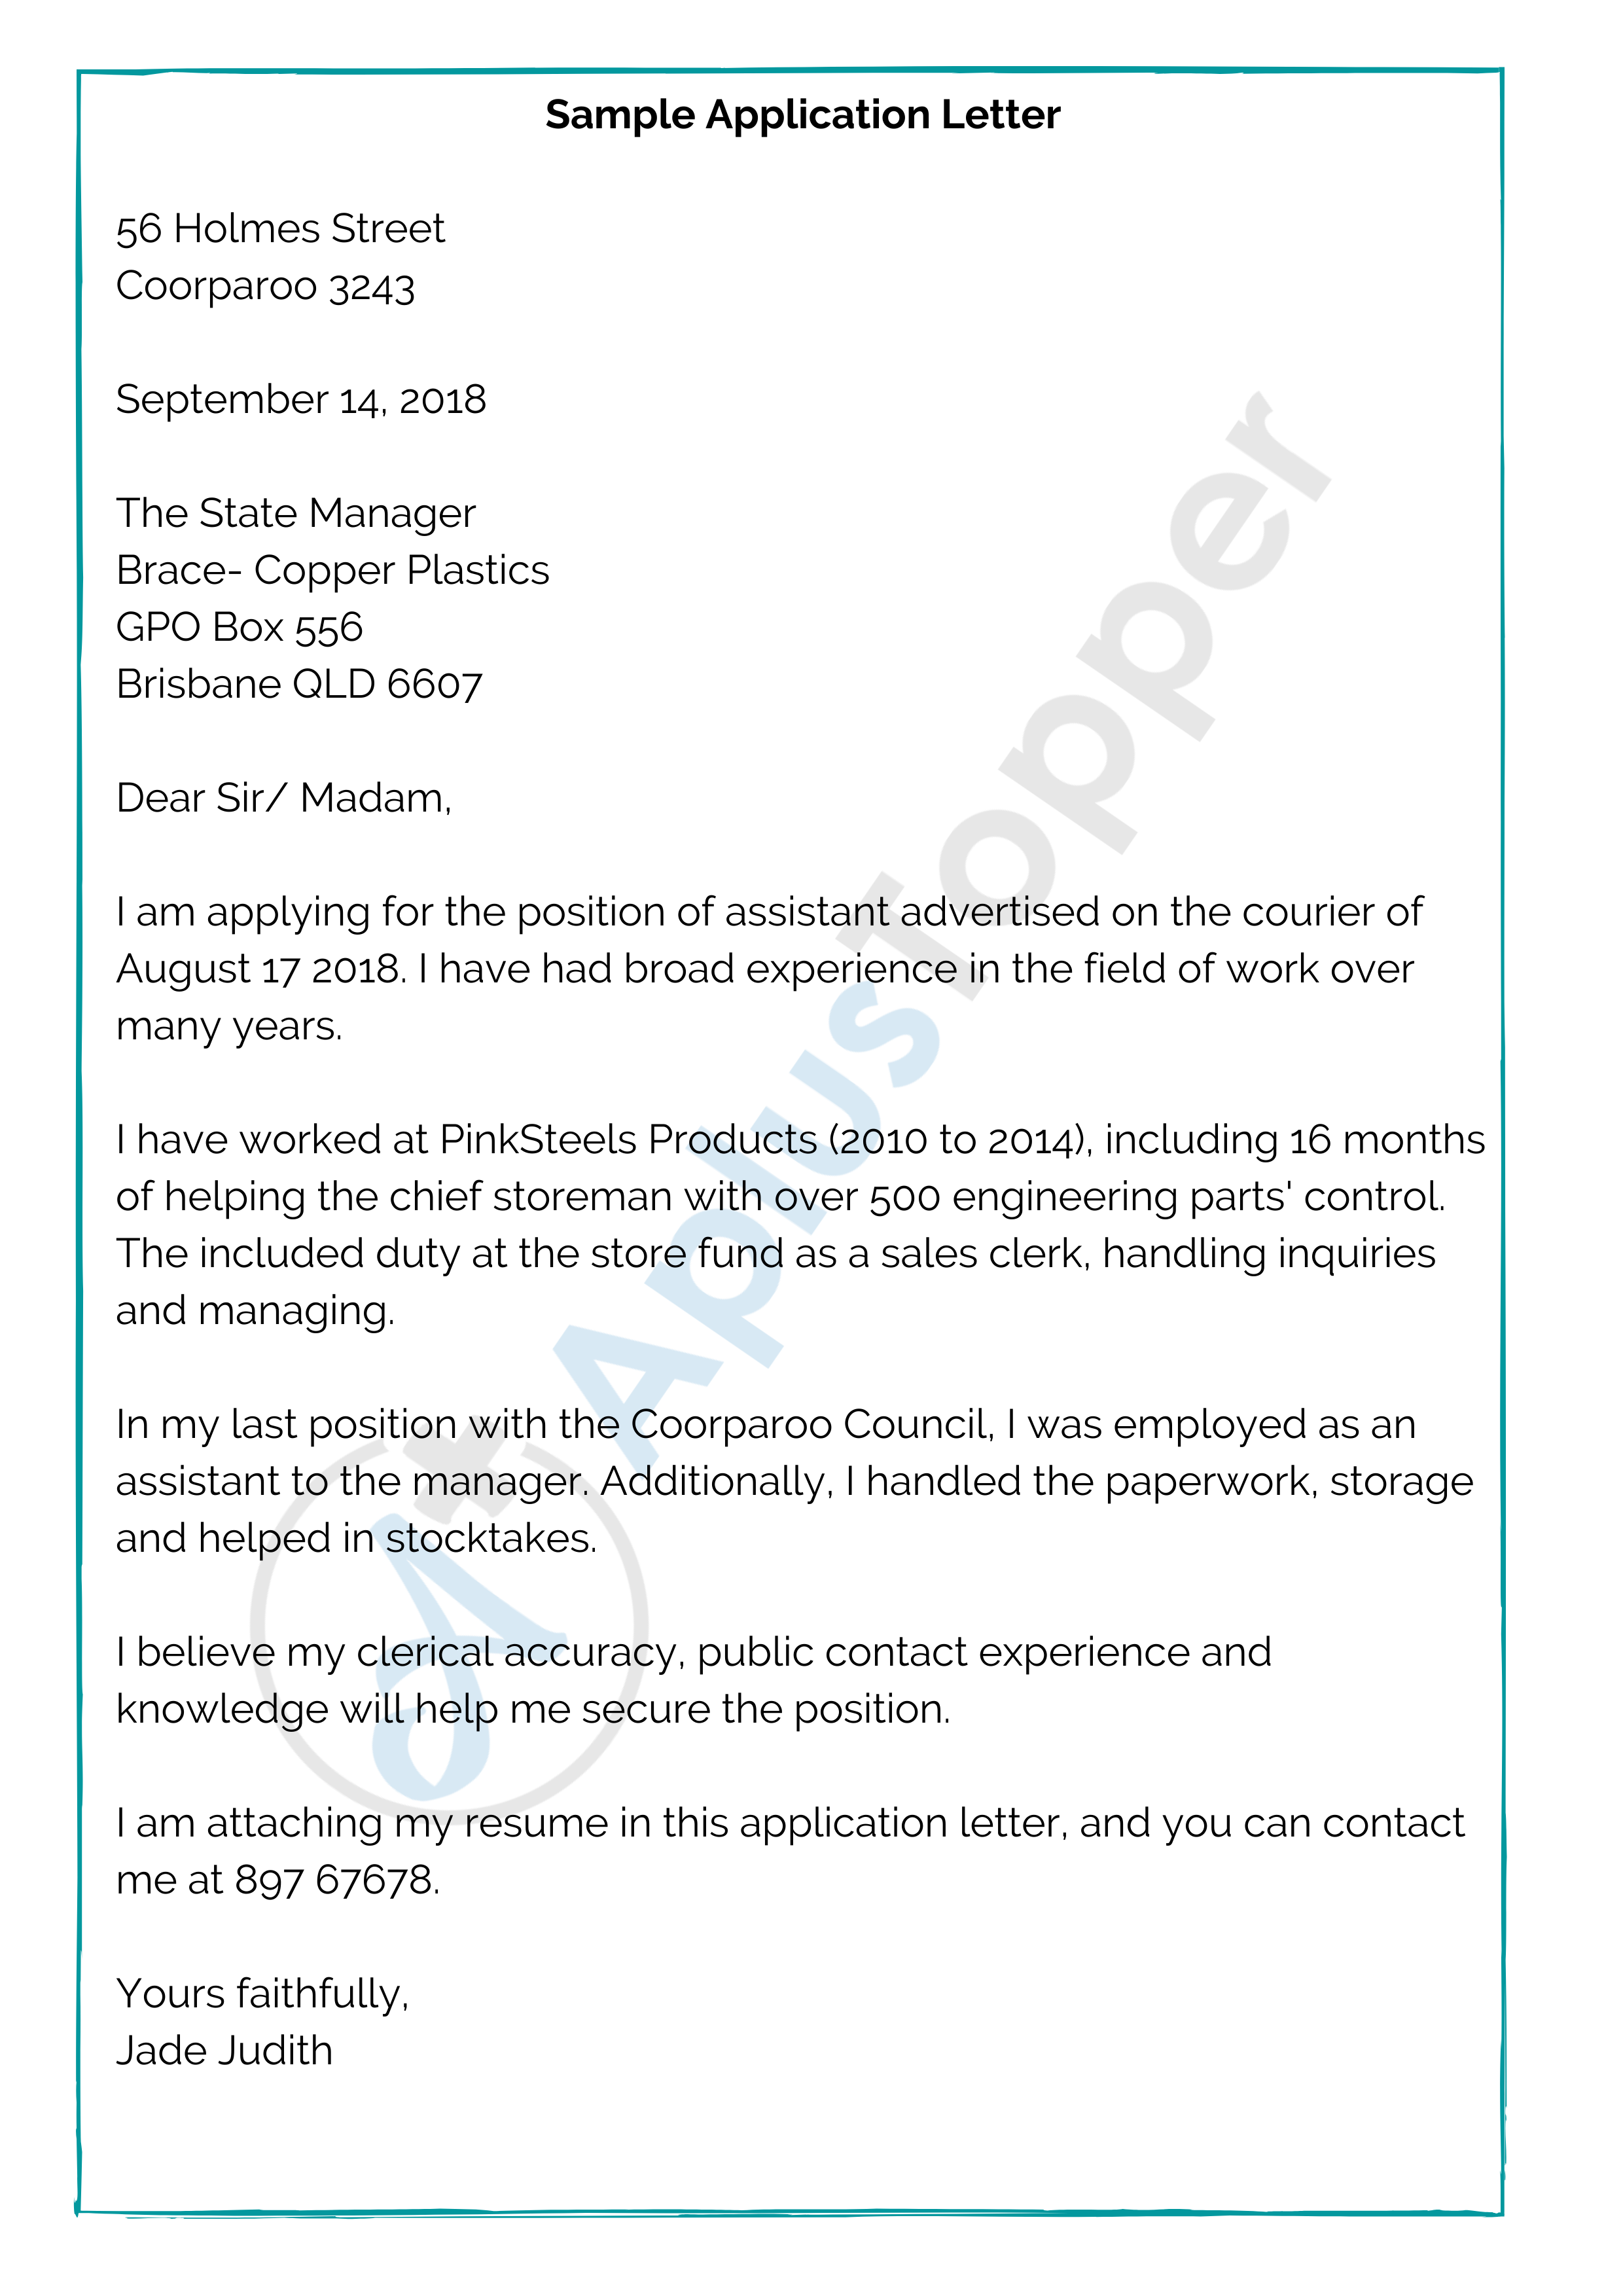 how to write an application letter for company work